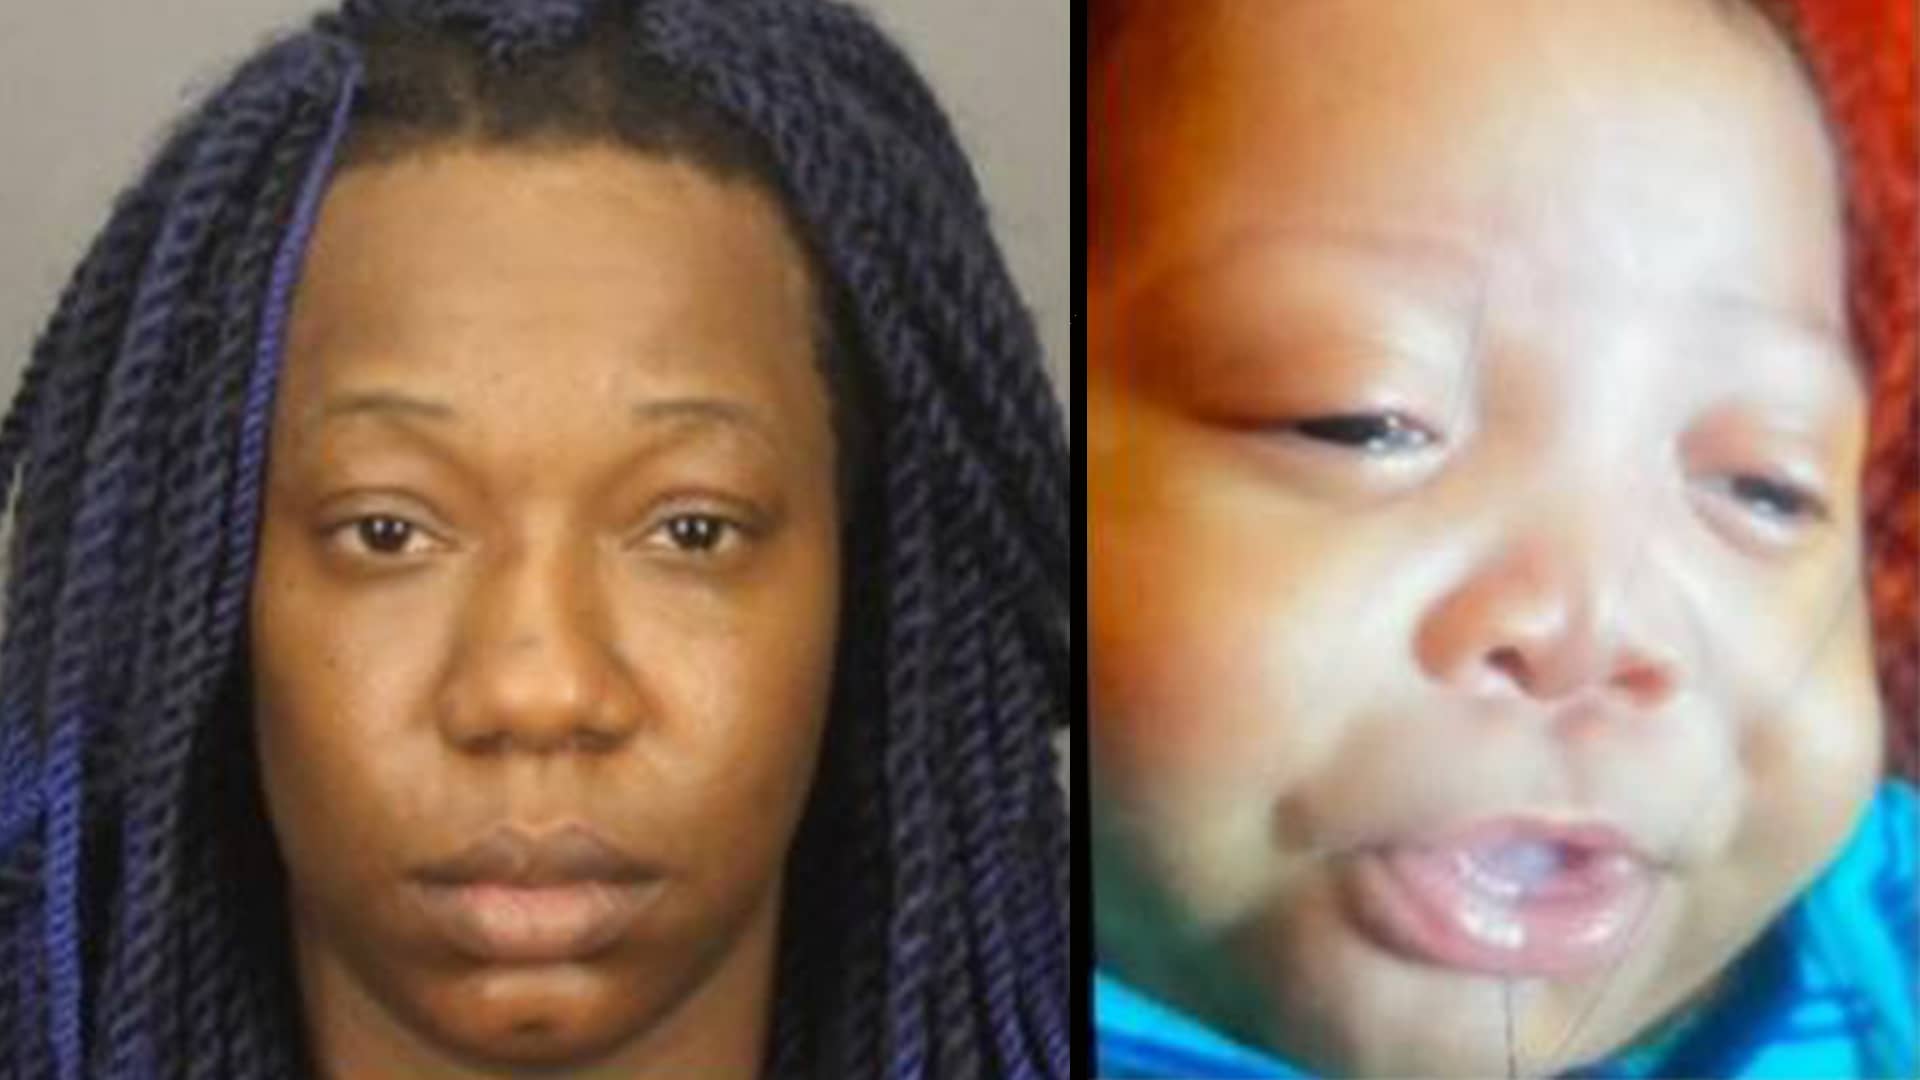 Missing person alert issued for infant from Rochester, believed to be